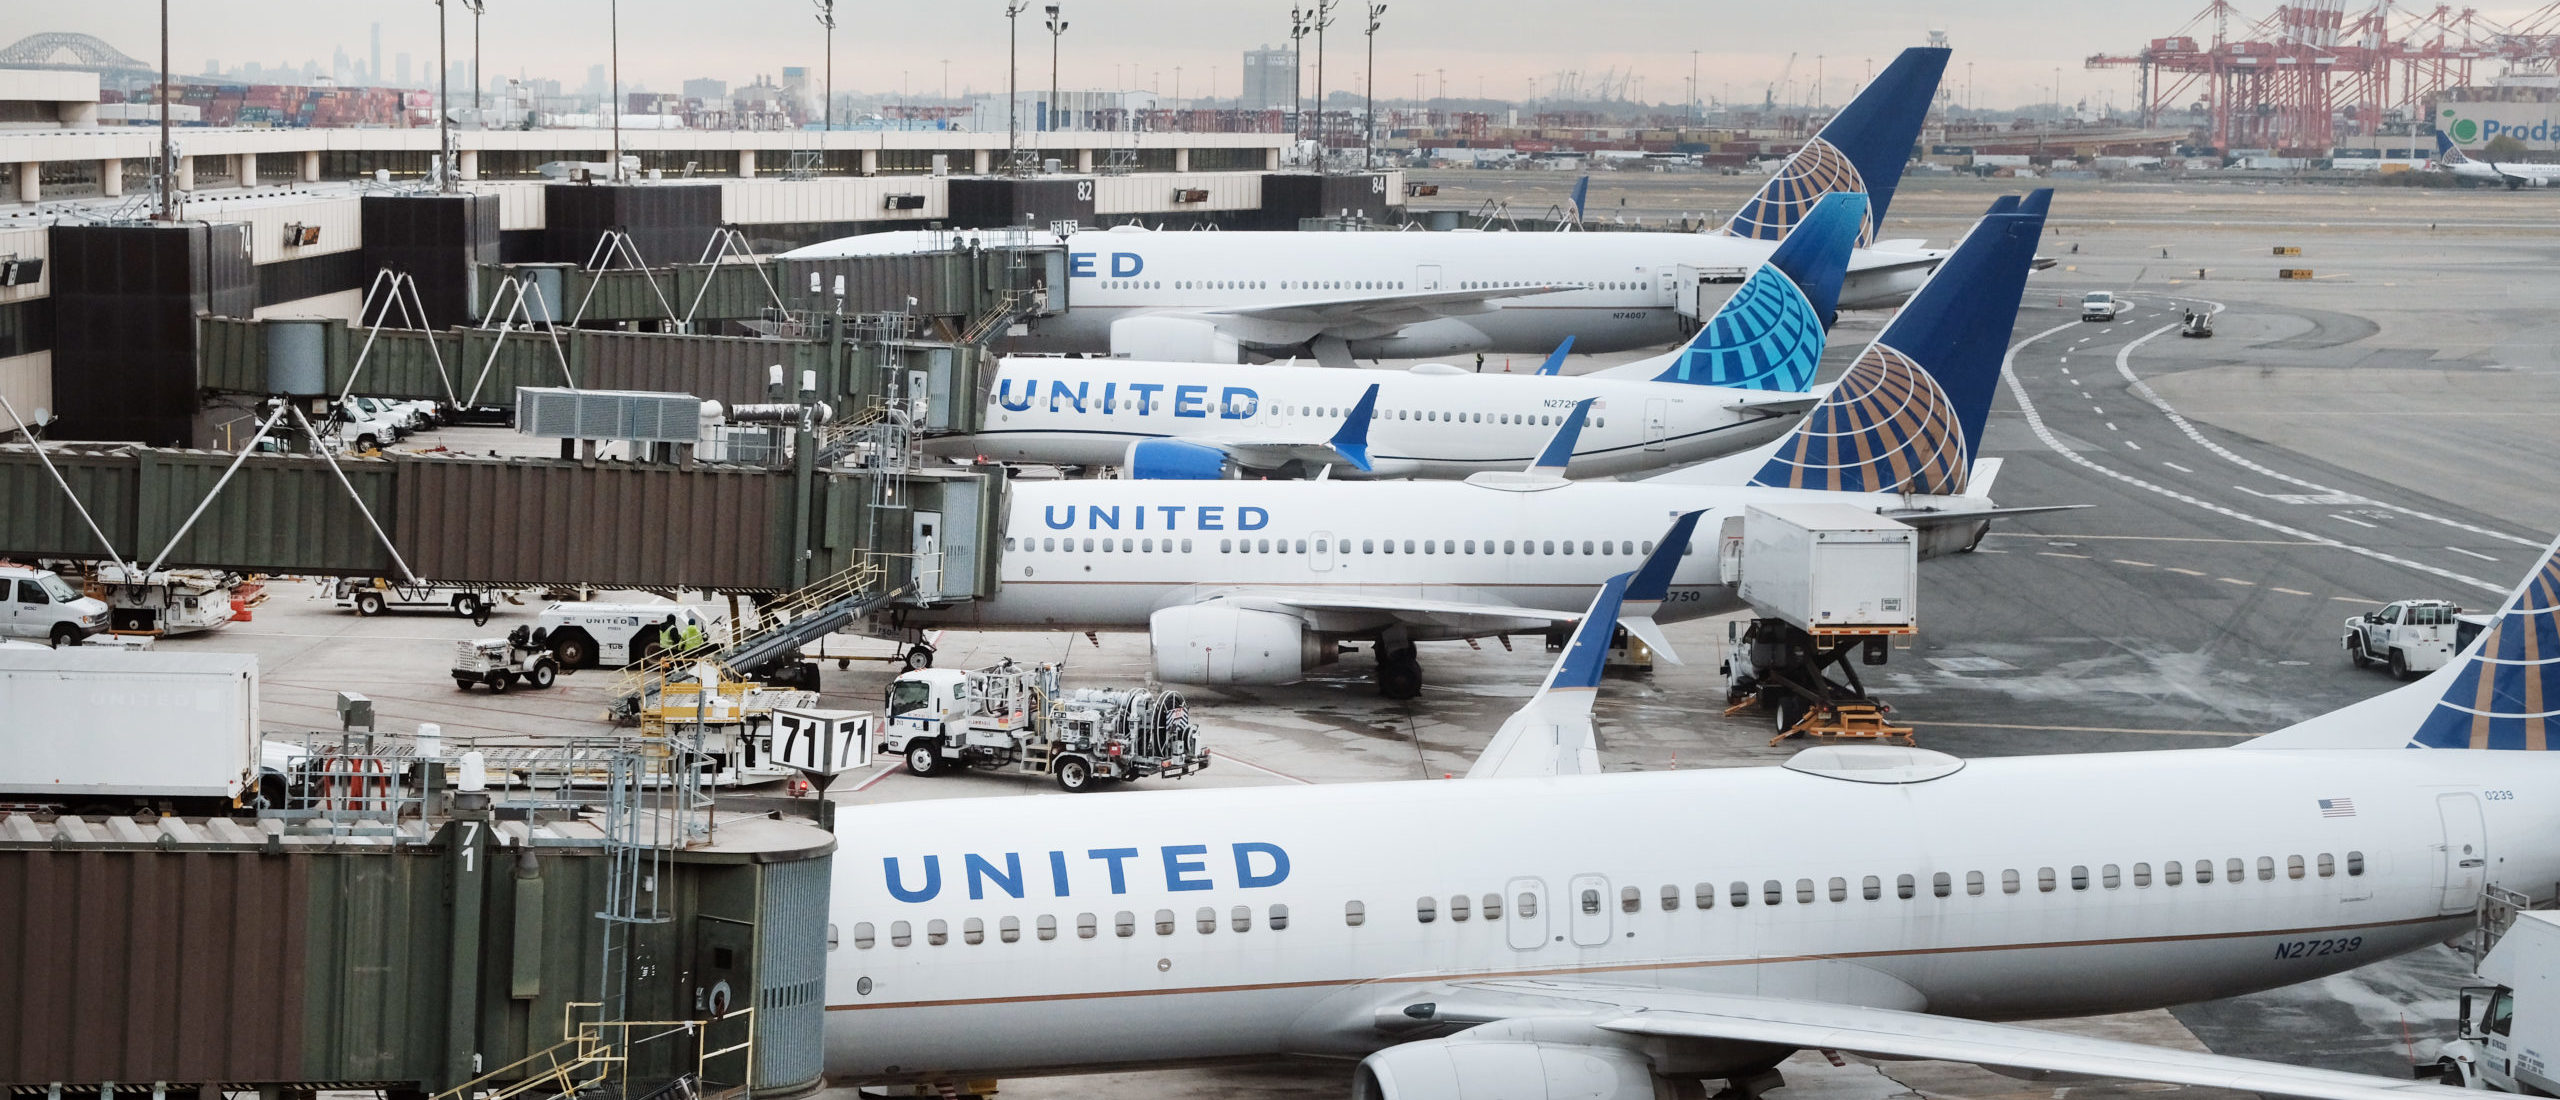 NEWARK, NEW JERSEY - NOVEMBER 30: United Airlines planes sit on the runway at Newark Liberty International Airport on November 30, 2021 in Newark, New Jersey. (Photo by Spencer Platt/Getty Images)